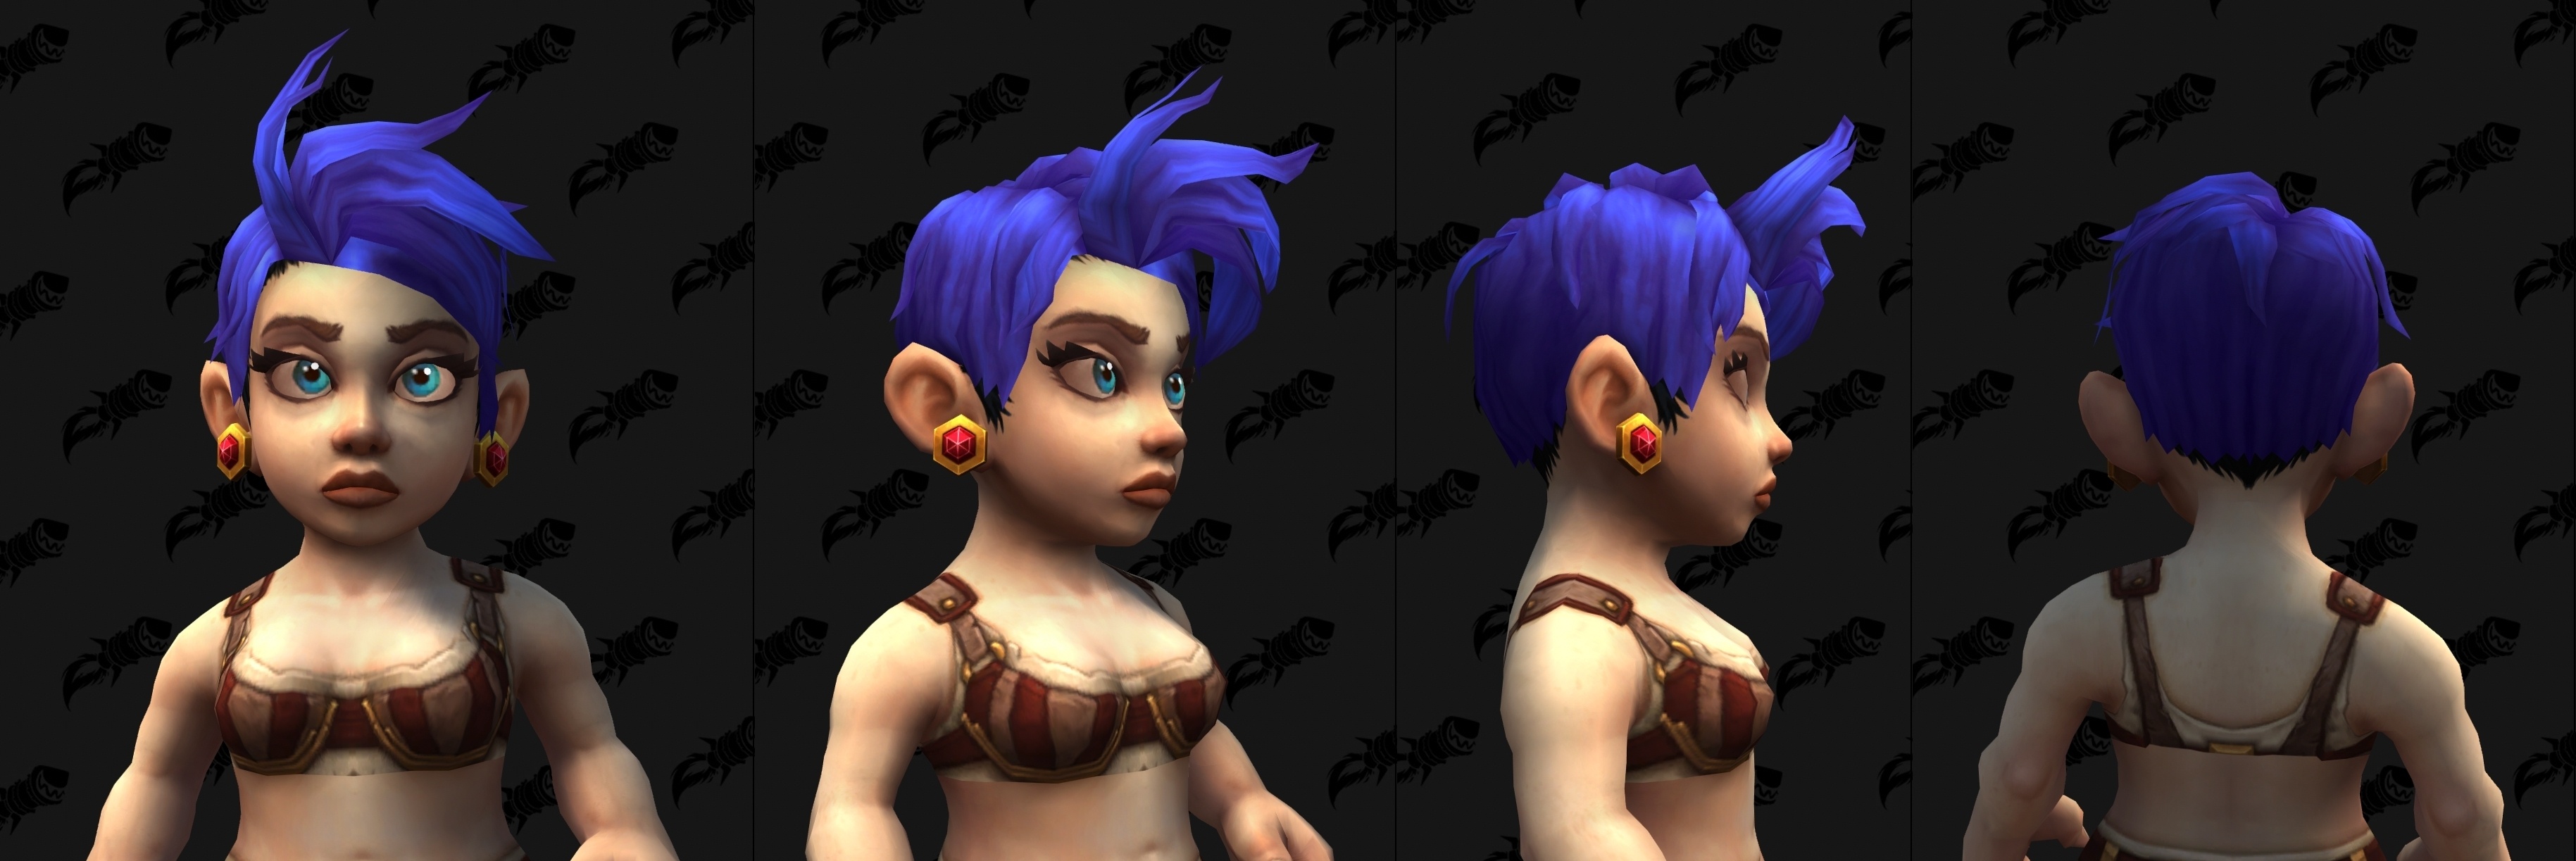 New Female Gnome Shadowlands Customization Options - Hairstyles and Earring...